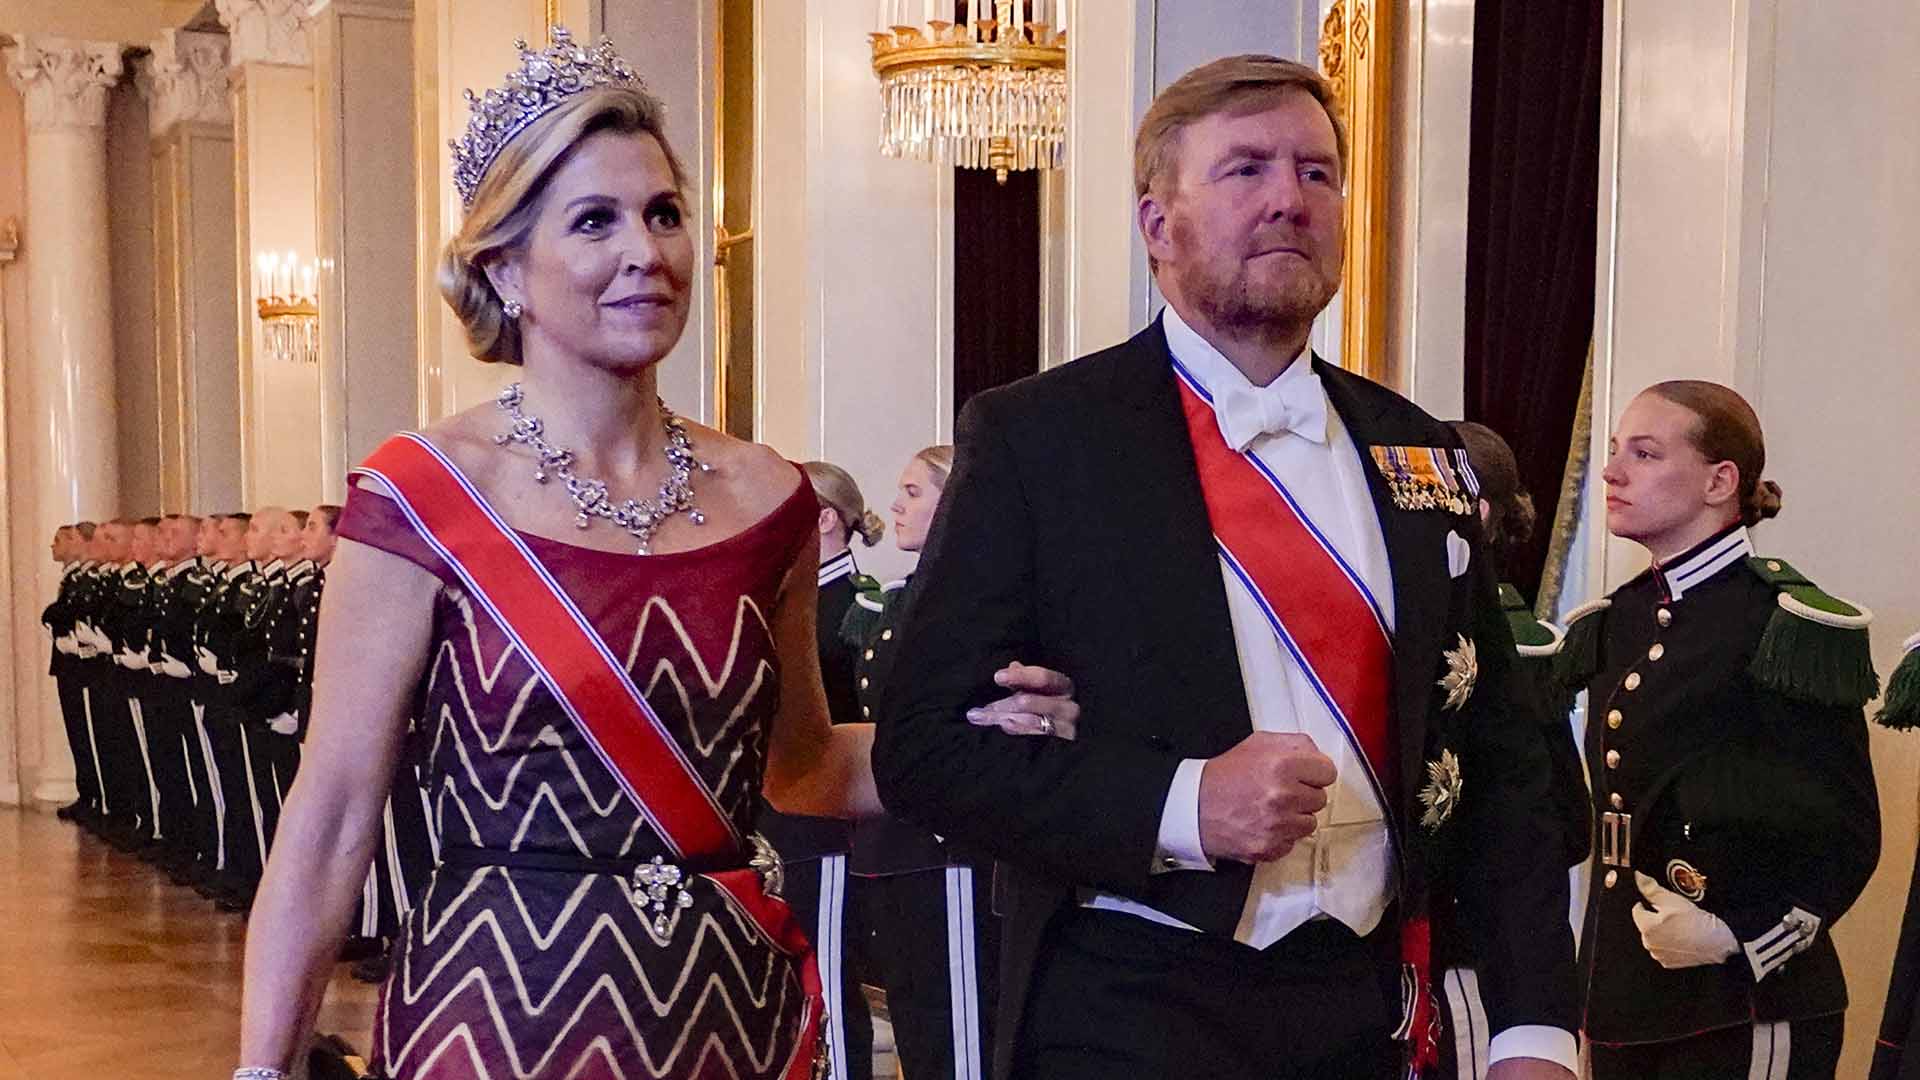 Queen Maxima and King Willem-Alexander of the Netherlands walk through The Great Hall before the gala dinner for Norway's Princess Ingrid Alexandra at the Palace  in Oslo, Friday June 17, 2022. Princess Ingrid Alexandra turned 18 on 21 January 2022. The celebrations were postponed until June 2022 due to COVID-19 restrictions. (Lise Aserud/NTB via AP)